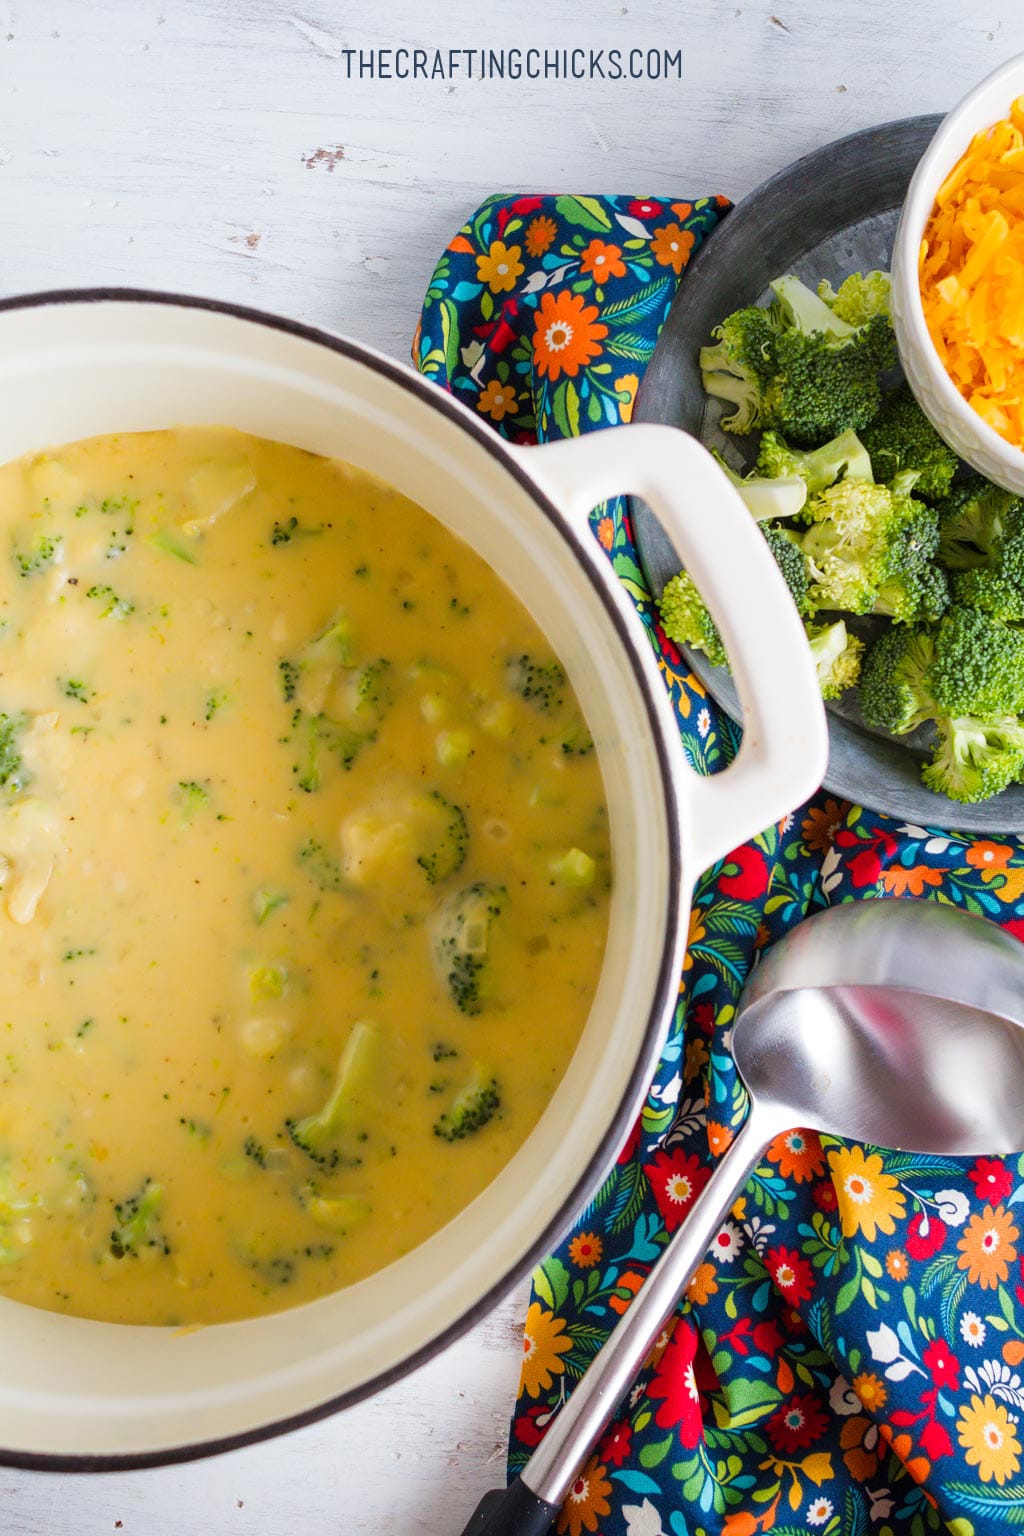 Broccoli Cheese Chowder Recipe - You only need a few ingredients and just 3o minutes!